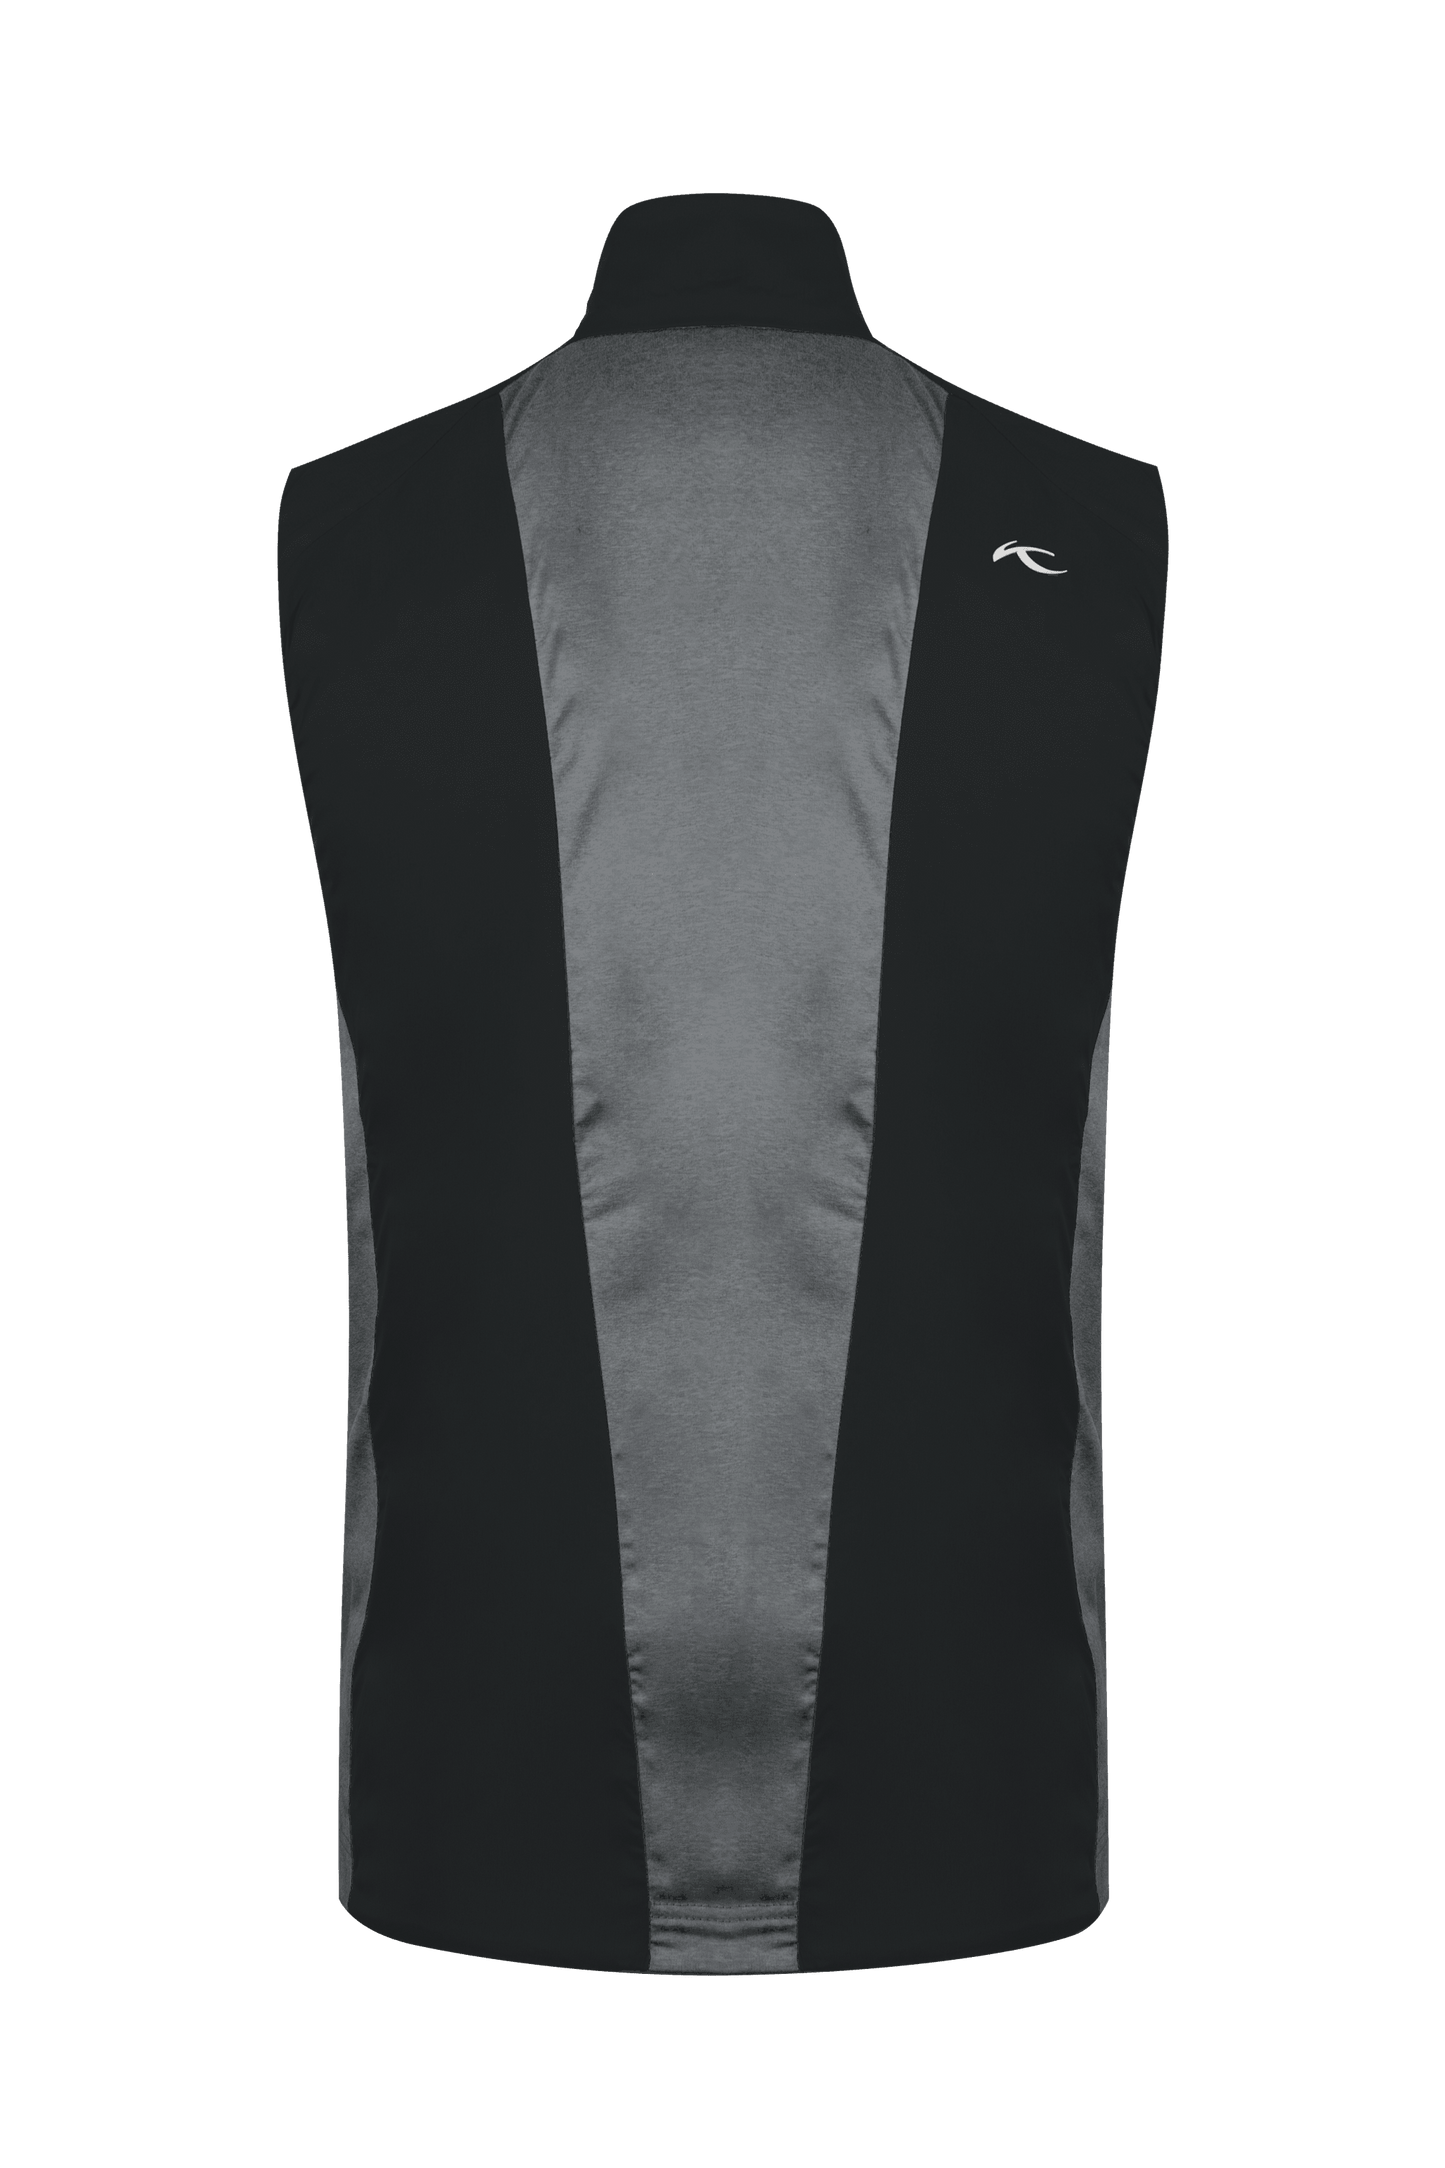 Men's Retention Gilet by Kjus - The Luxury Promotional Gifts Company Limited